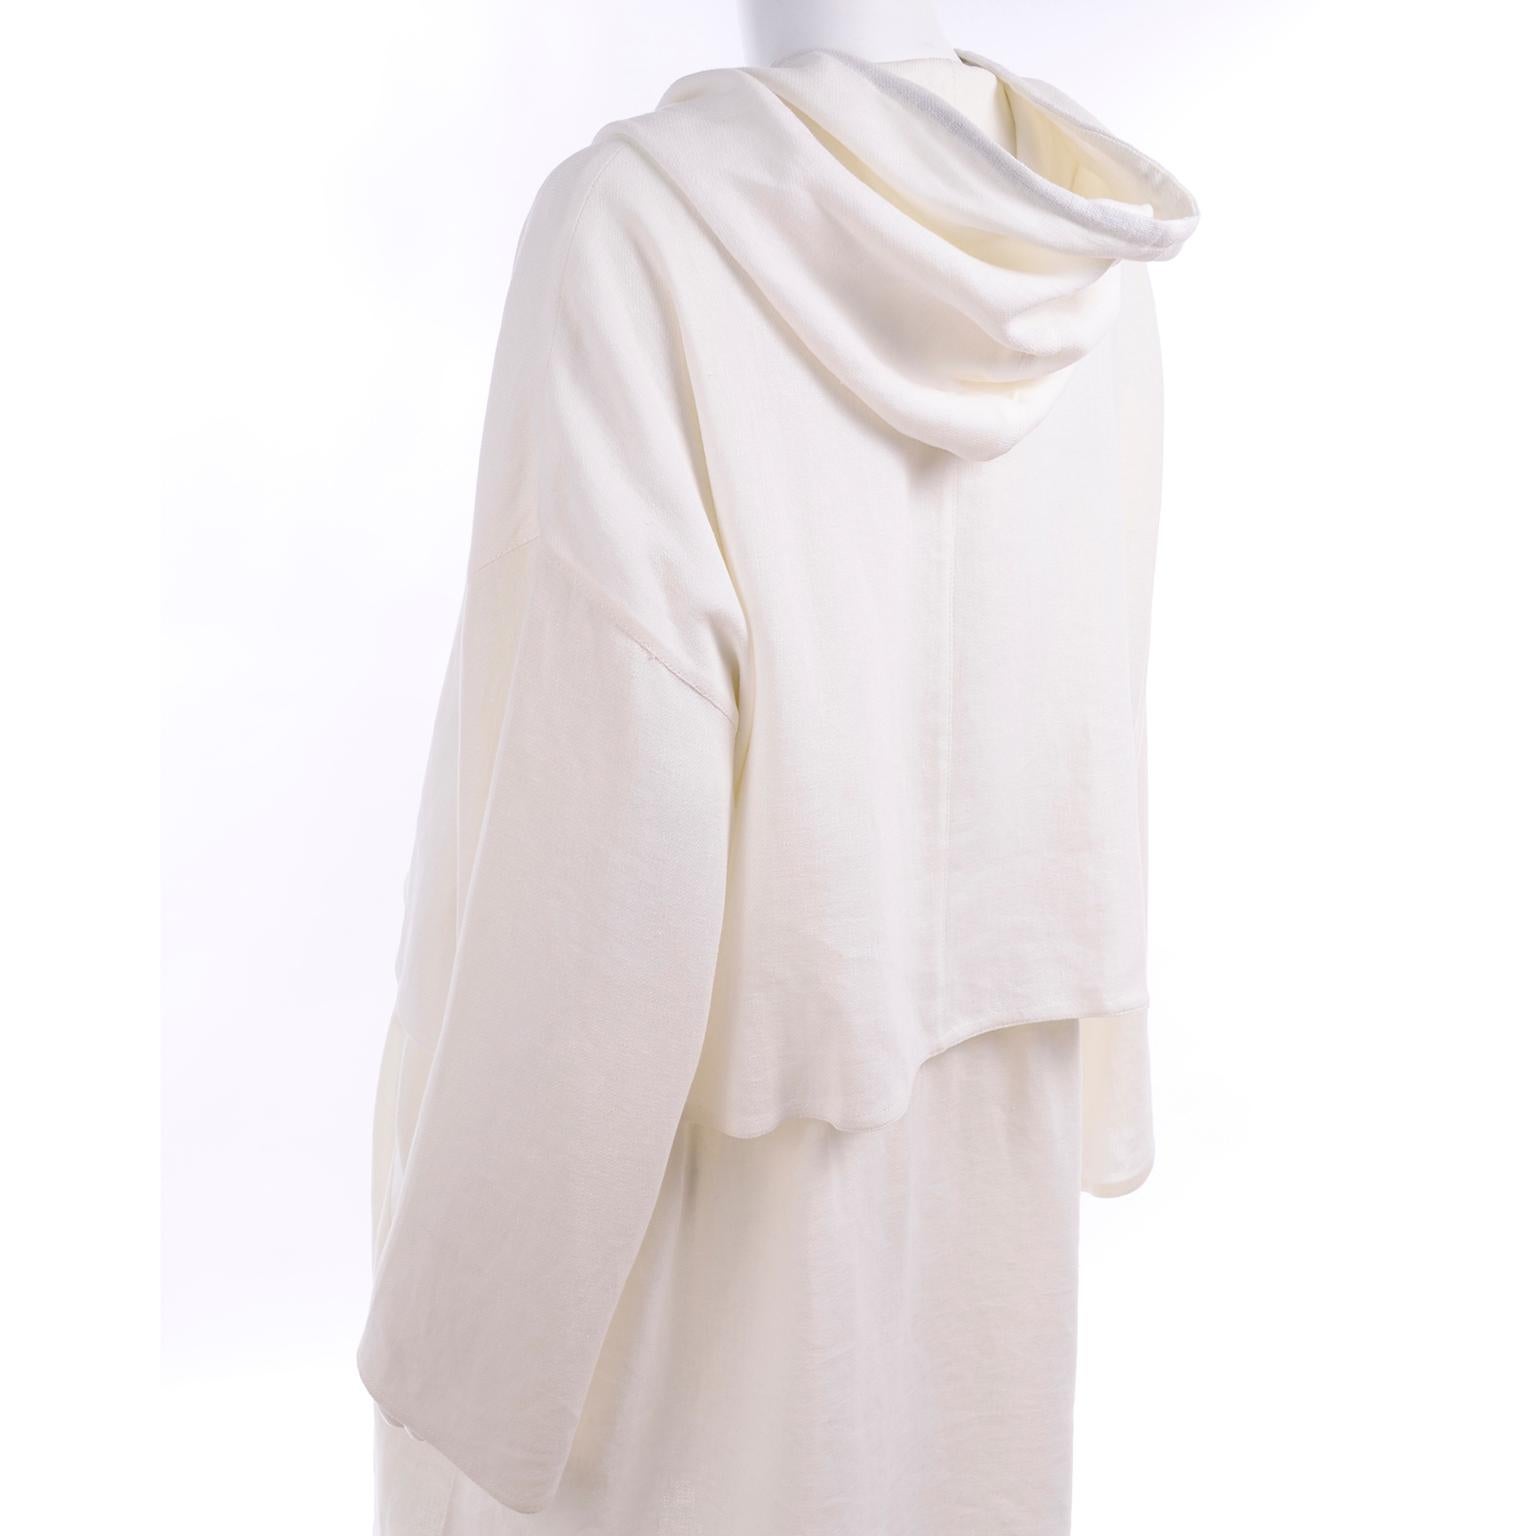 Deadstock New White Linen Dusan Coat Drawstring Jacket with Hood New With Tags 5